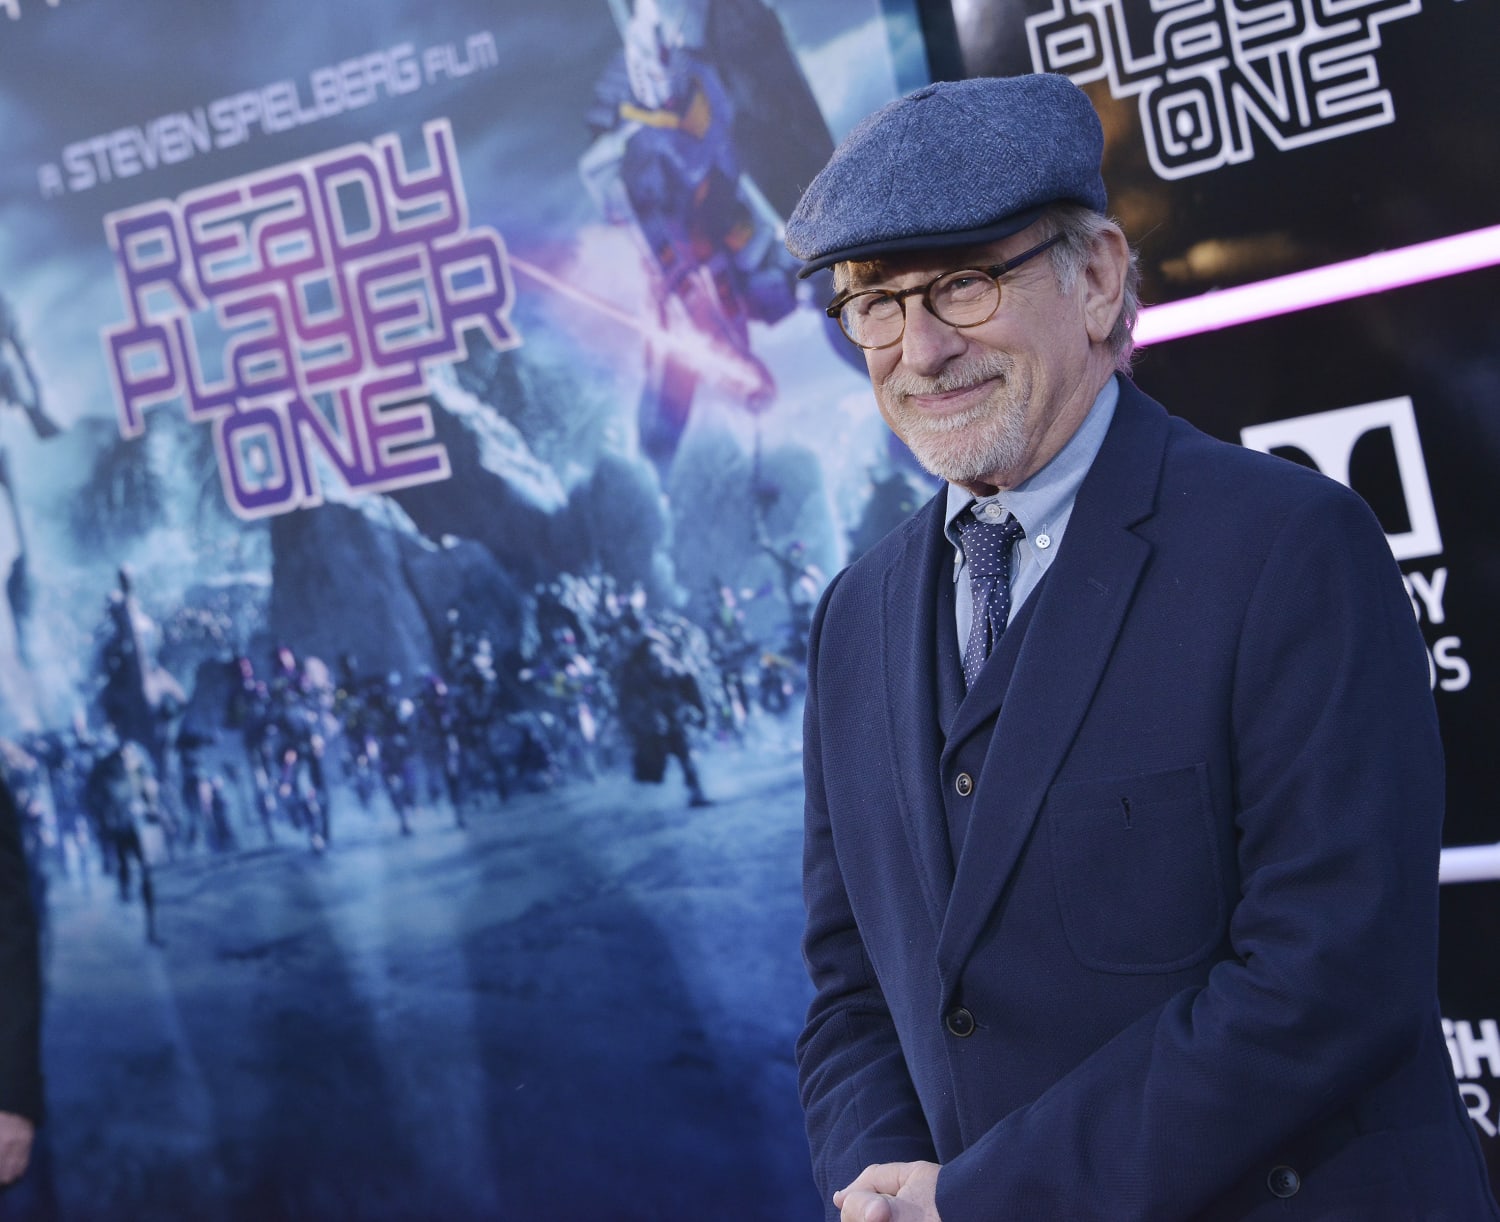 Ready Player One (2018) directed by Steven Spielberg • Reviews